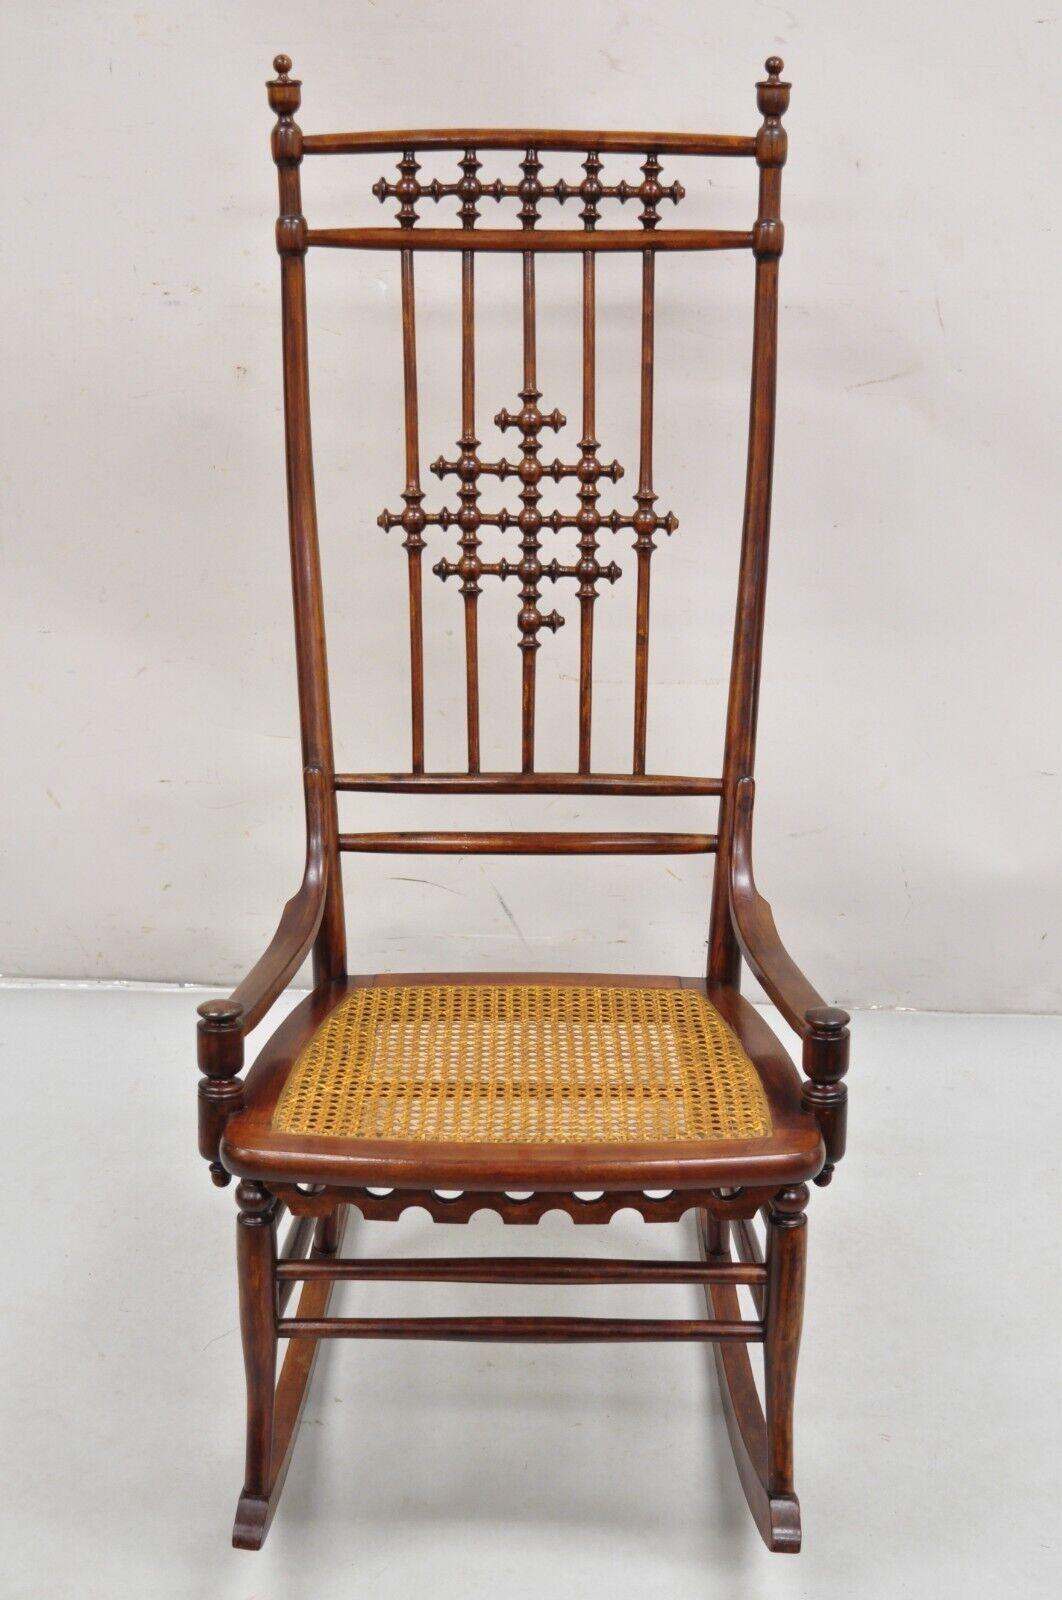 Victorian Aesthetic Movement Chestnut Stick & Ball Spindle Rocker Rocking Chair For Sale 5